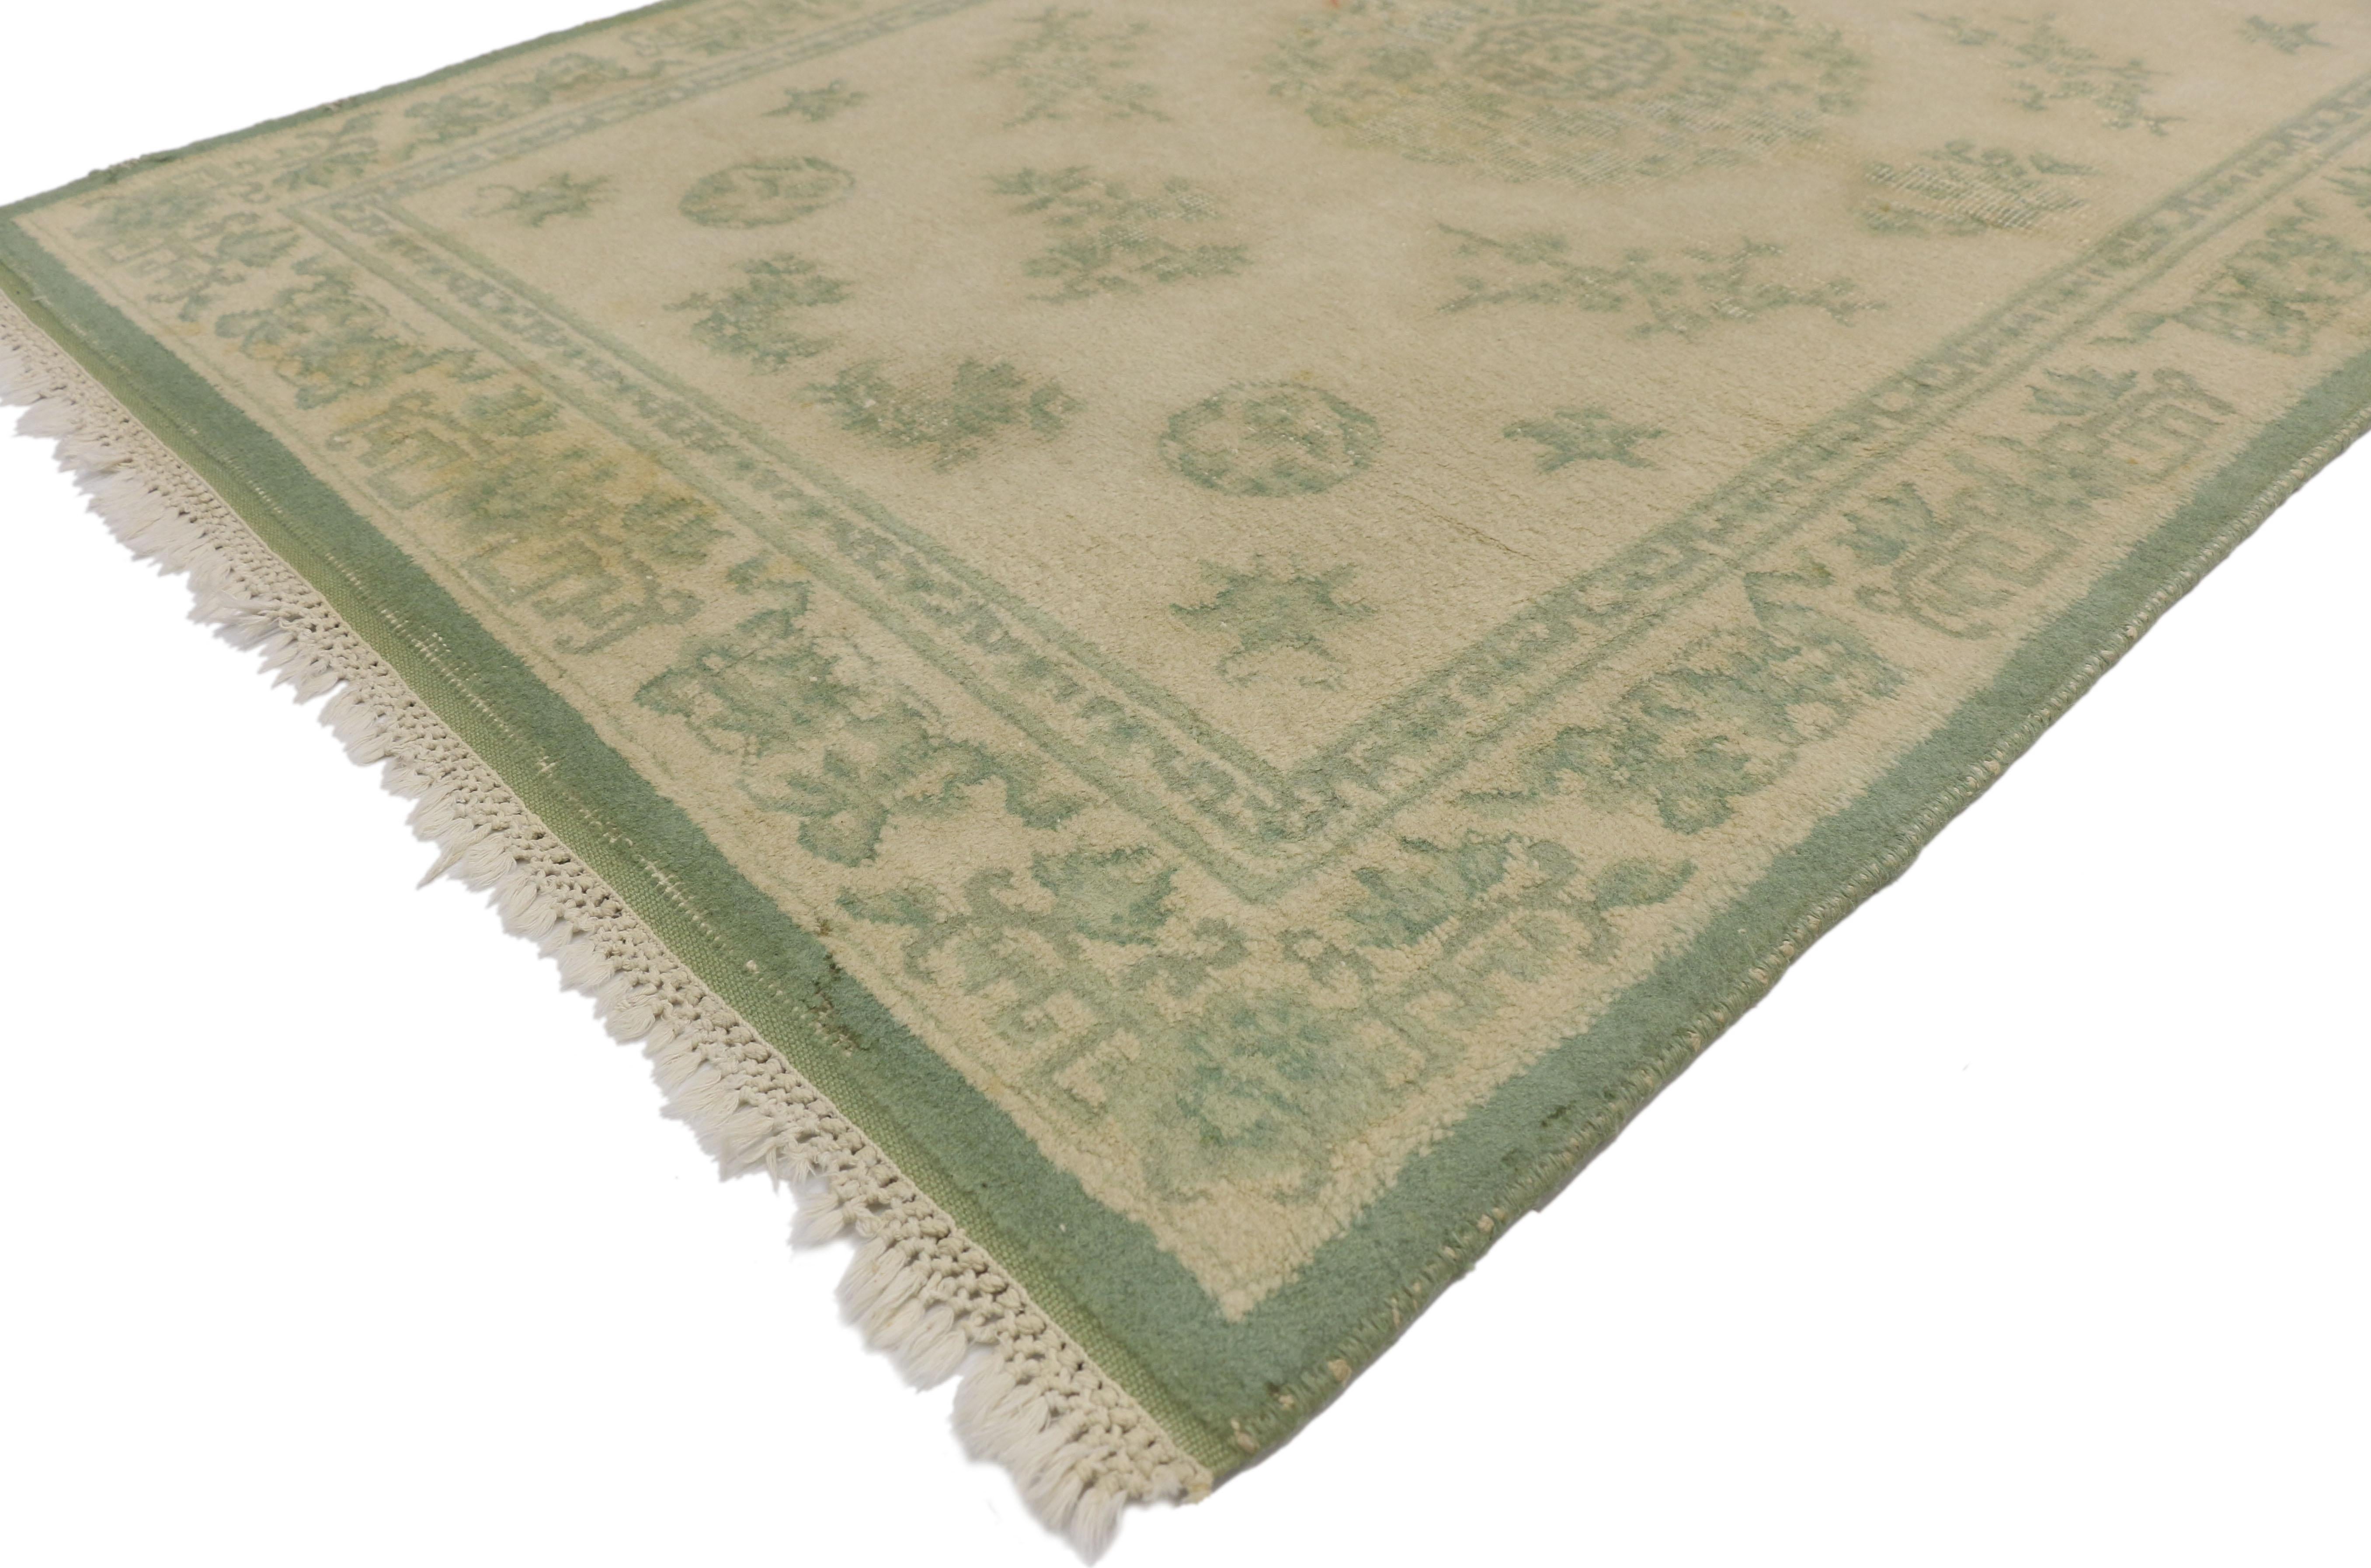 74742 Distressed Weathered Vintage Indian Rug with Chinoiserie Shabby Chic Style 03'11 x 06'00. Versatility and high end style collide in this beautifully worn and well loved vintage Indian rug. Elegantly designed and timelessly weathered, this